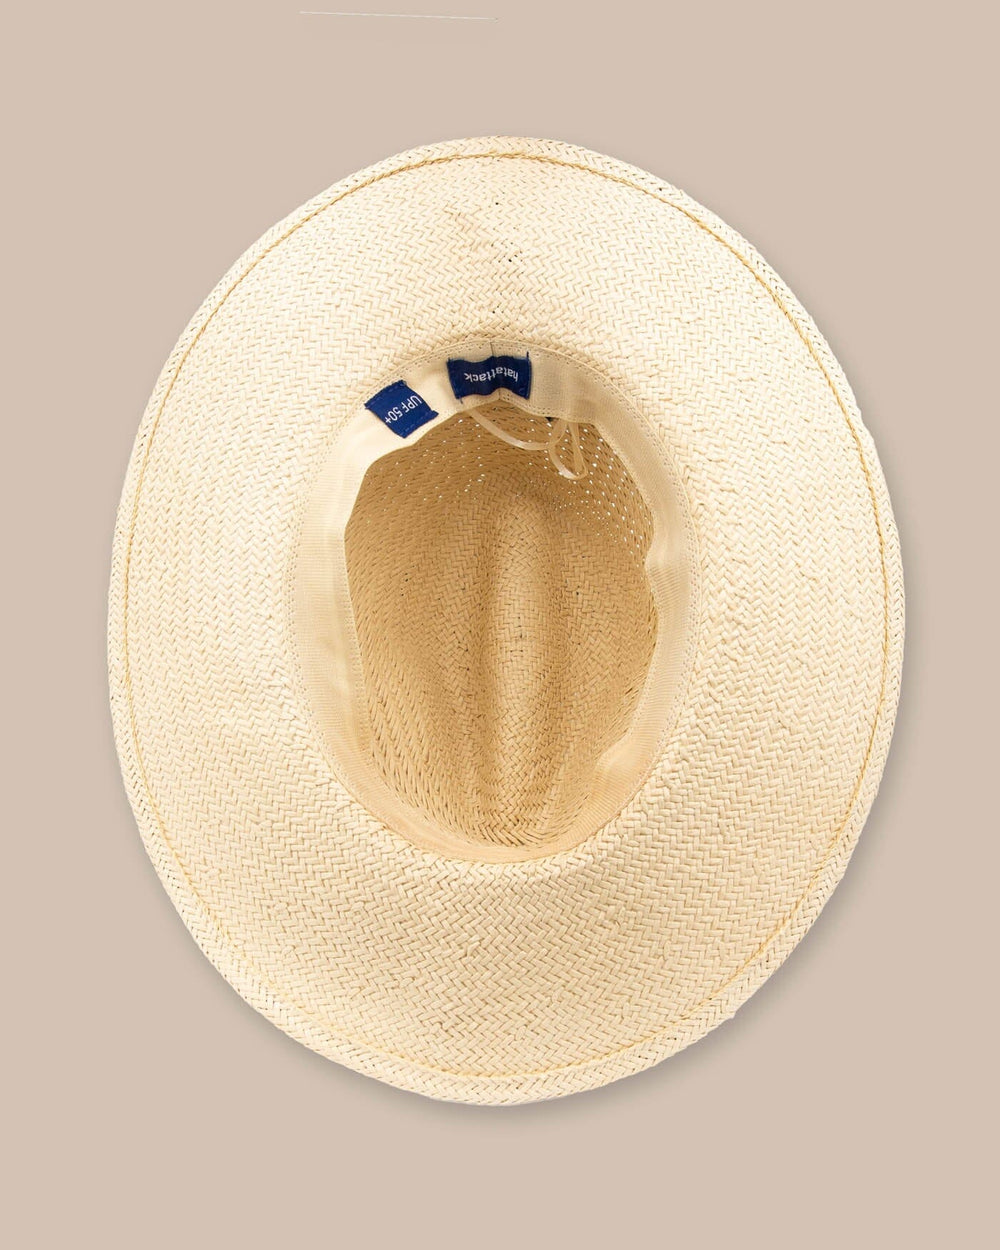 Southern Tide Women's Packable Straw Beach Hat Brown (One Size) 100% Paper Straw